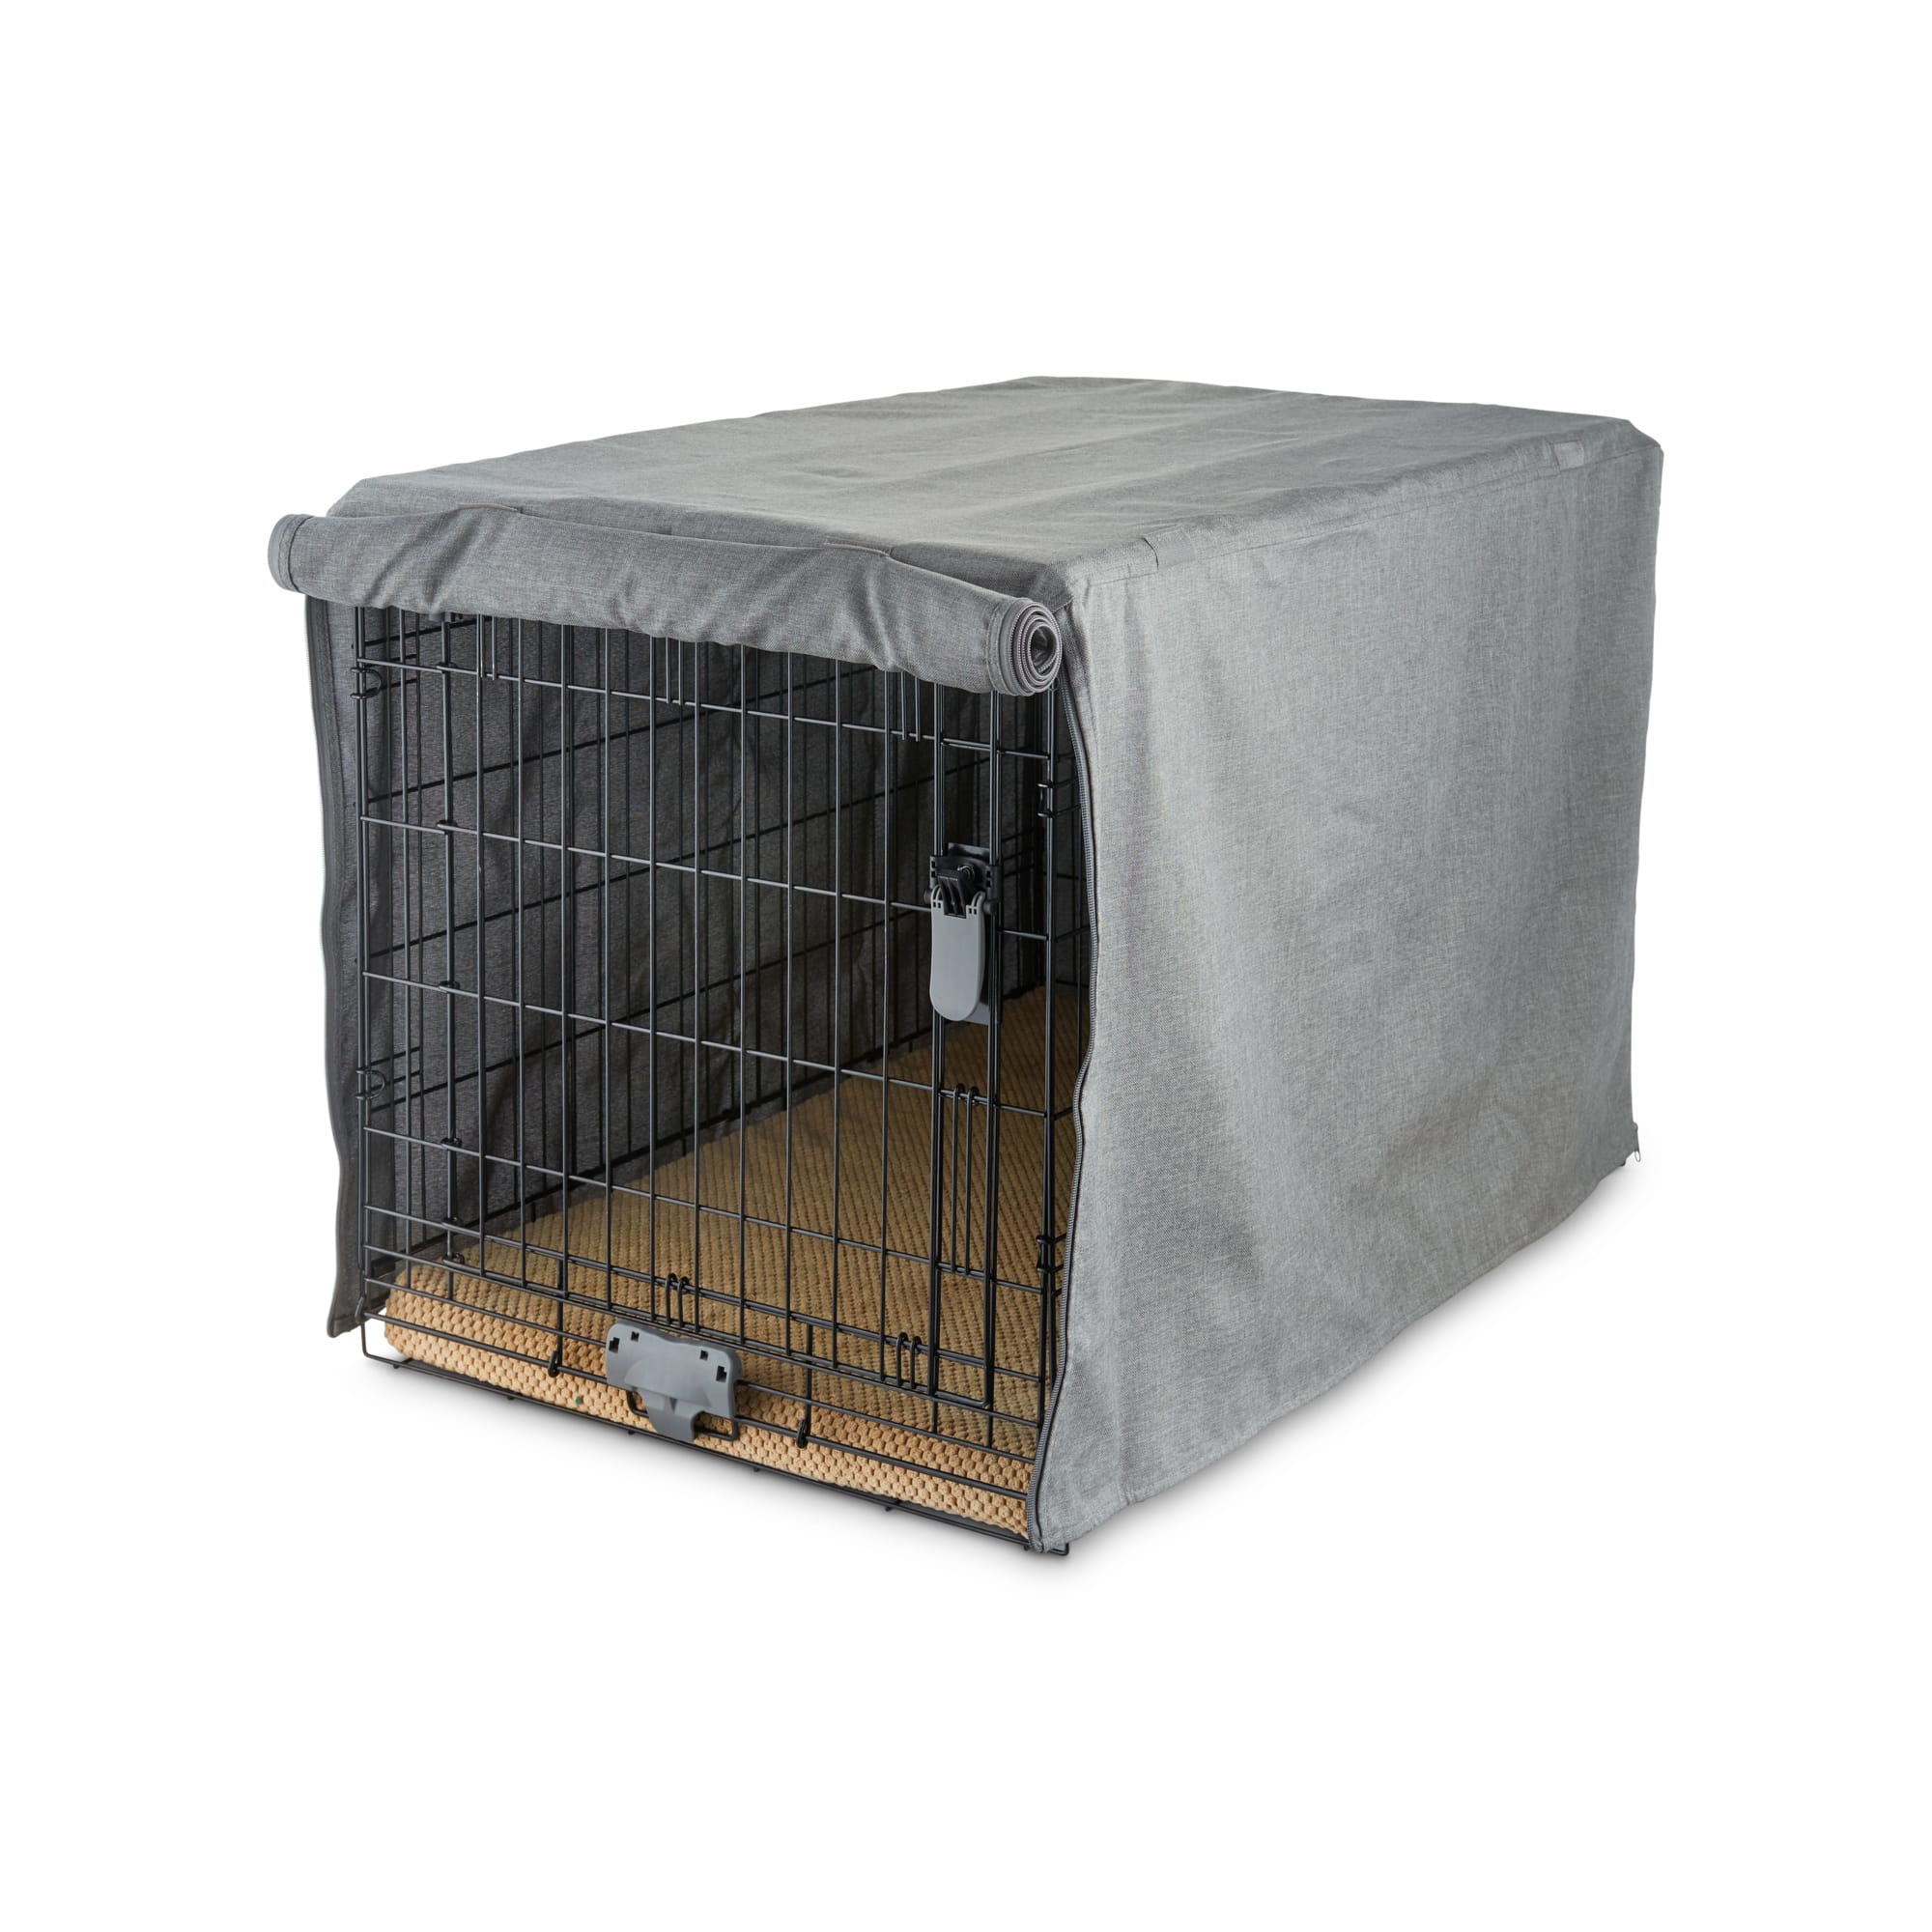 Durable Windproof & Dustproof Pet Kennel Cover for Indoor Outdoor Protection Beige, 25L x 19W x 20H inch Dog Crate Cover Crate Cover for Dog Crates Pet Accessories Fits Most Dog Crates